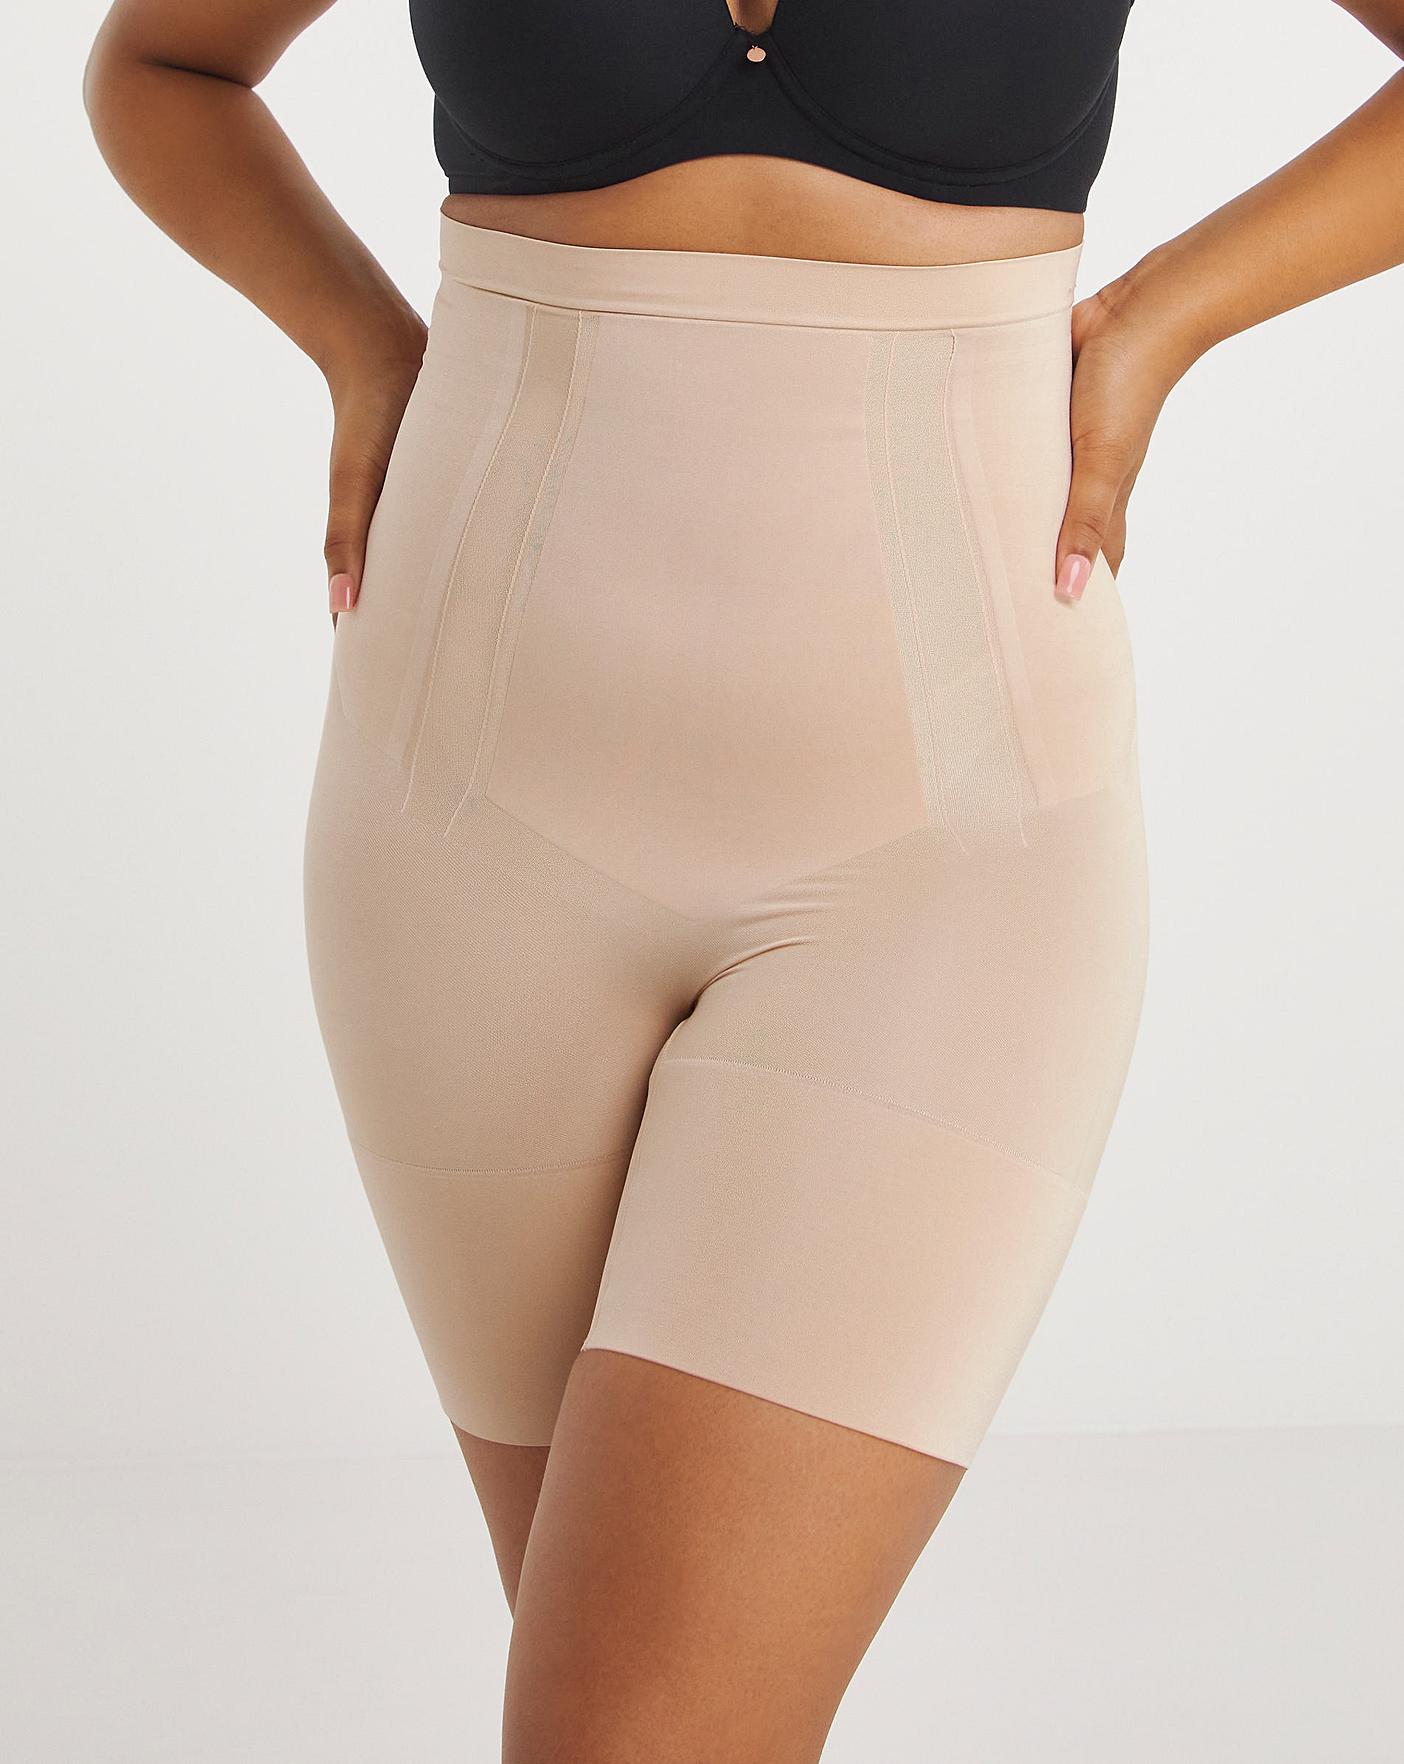 Spanx Oncore High-waist Shaper Briefs In Soft Nude- Nude